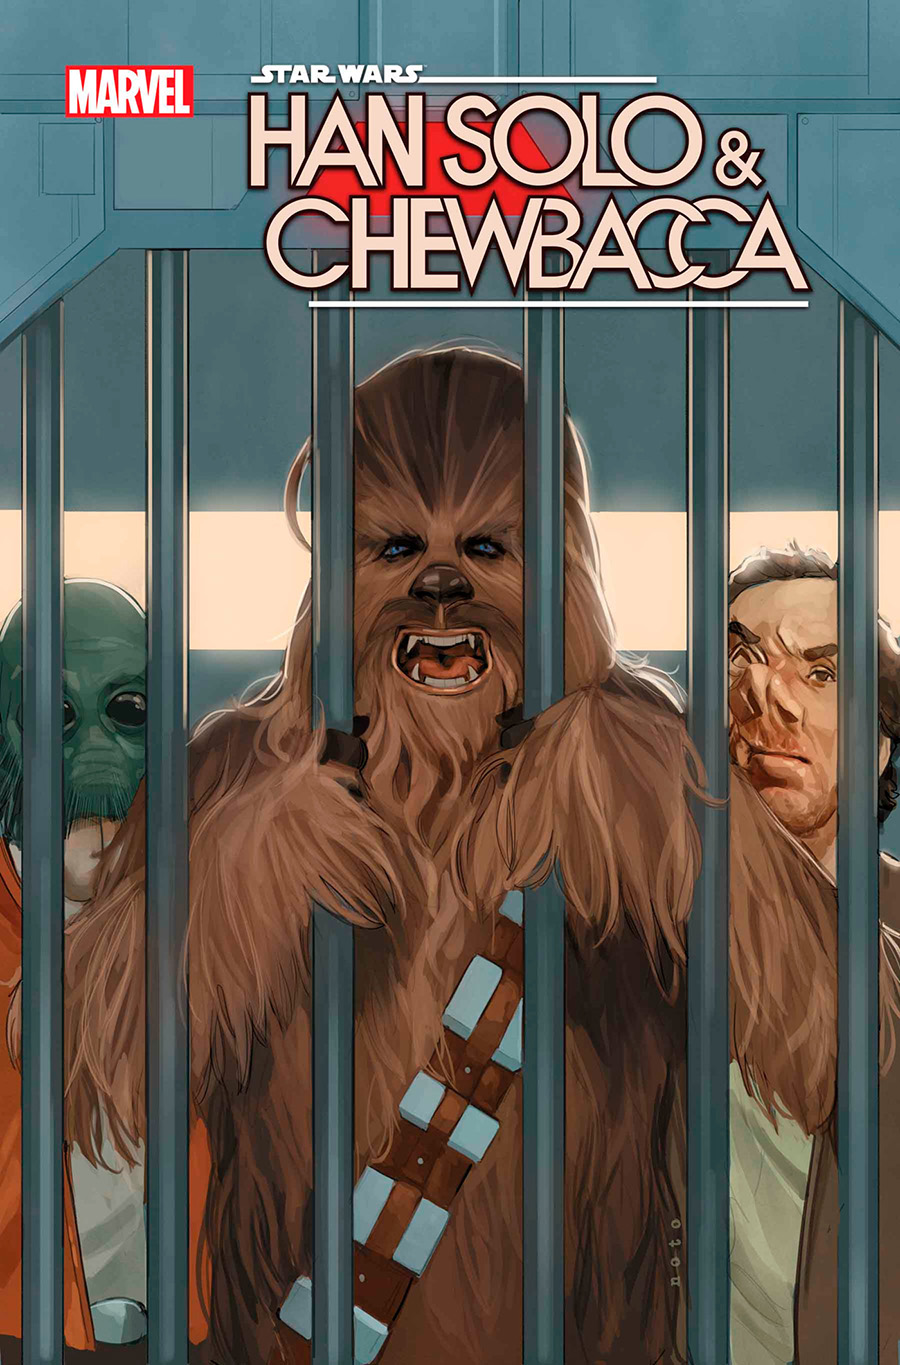 Star Wars Han Solo & Chewbacca #6 Cover A Regular Phil Noto Cover